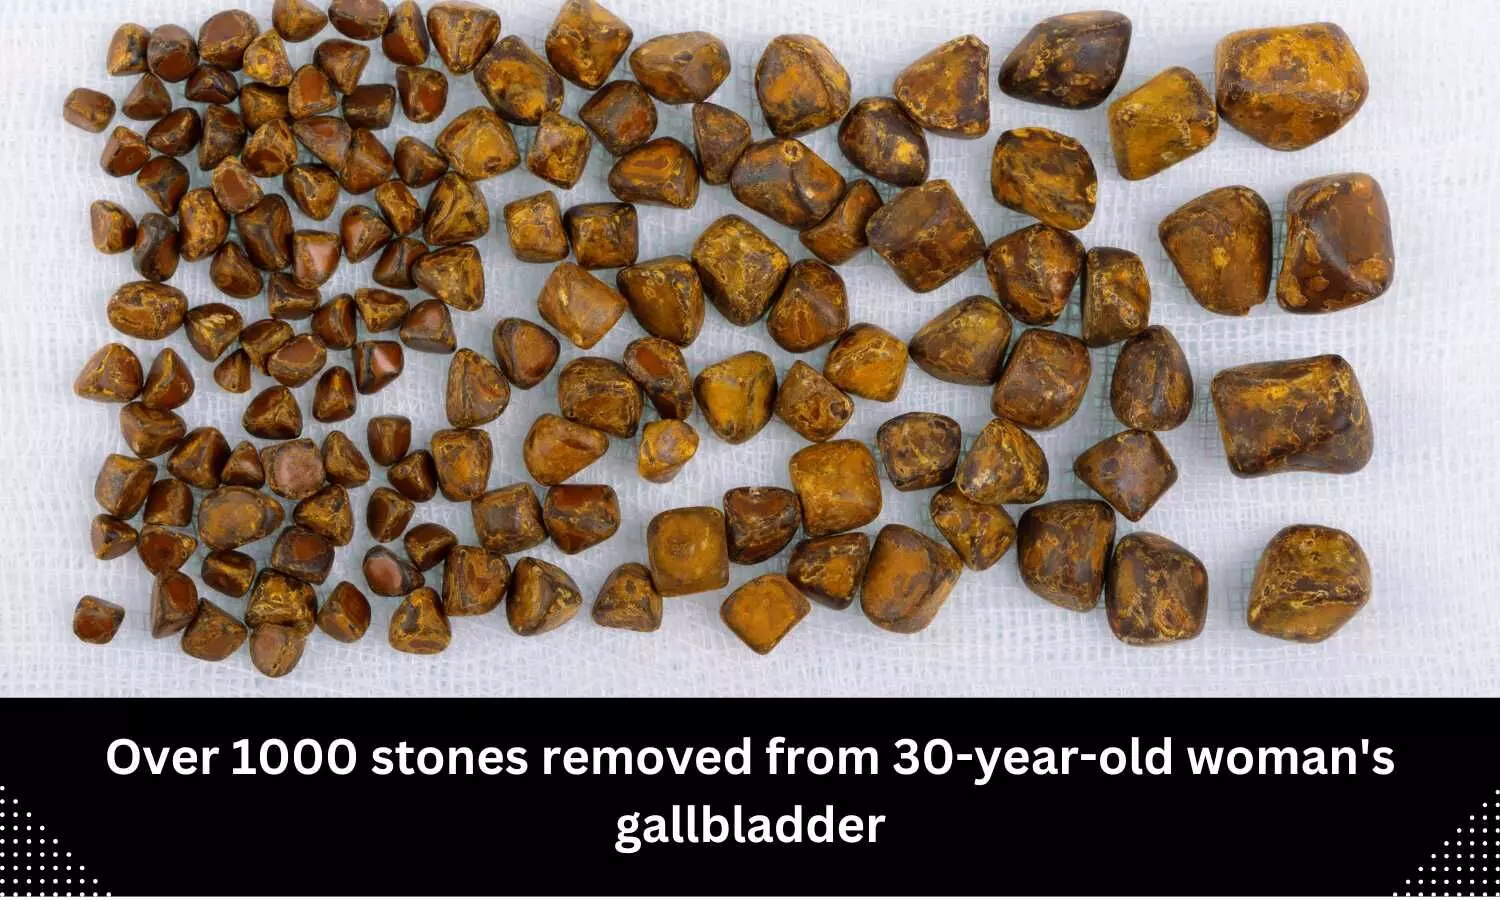 Over 1000 stones removed from 30-year-old womans gallbladder